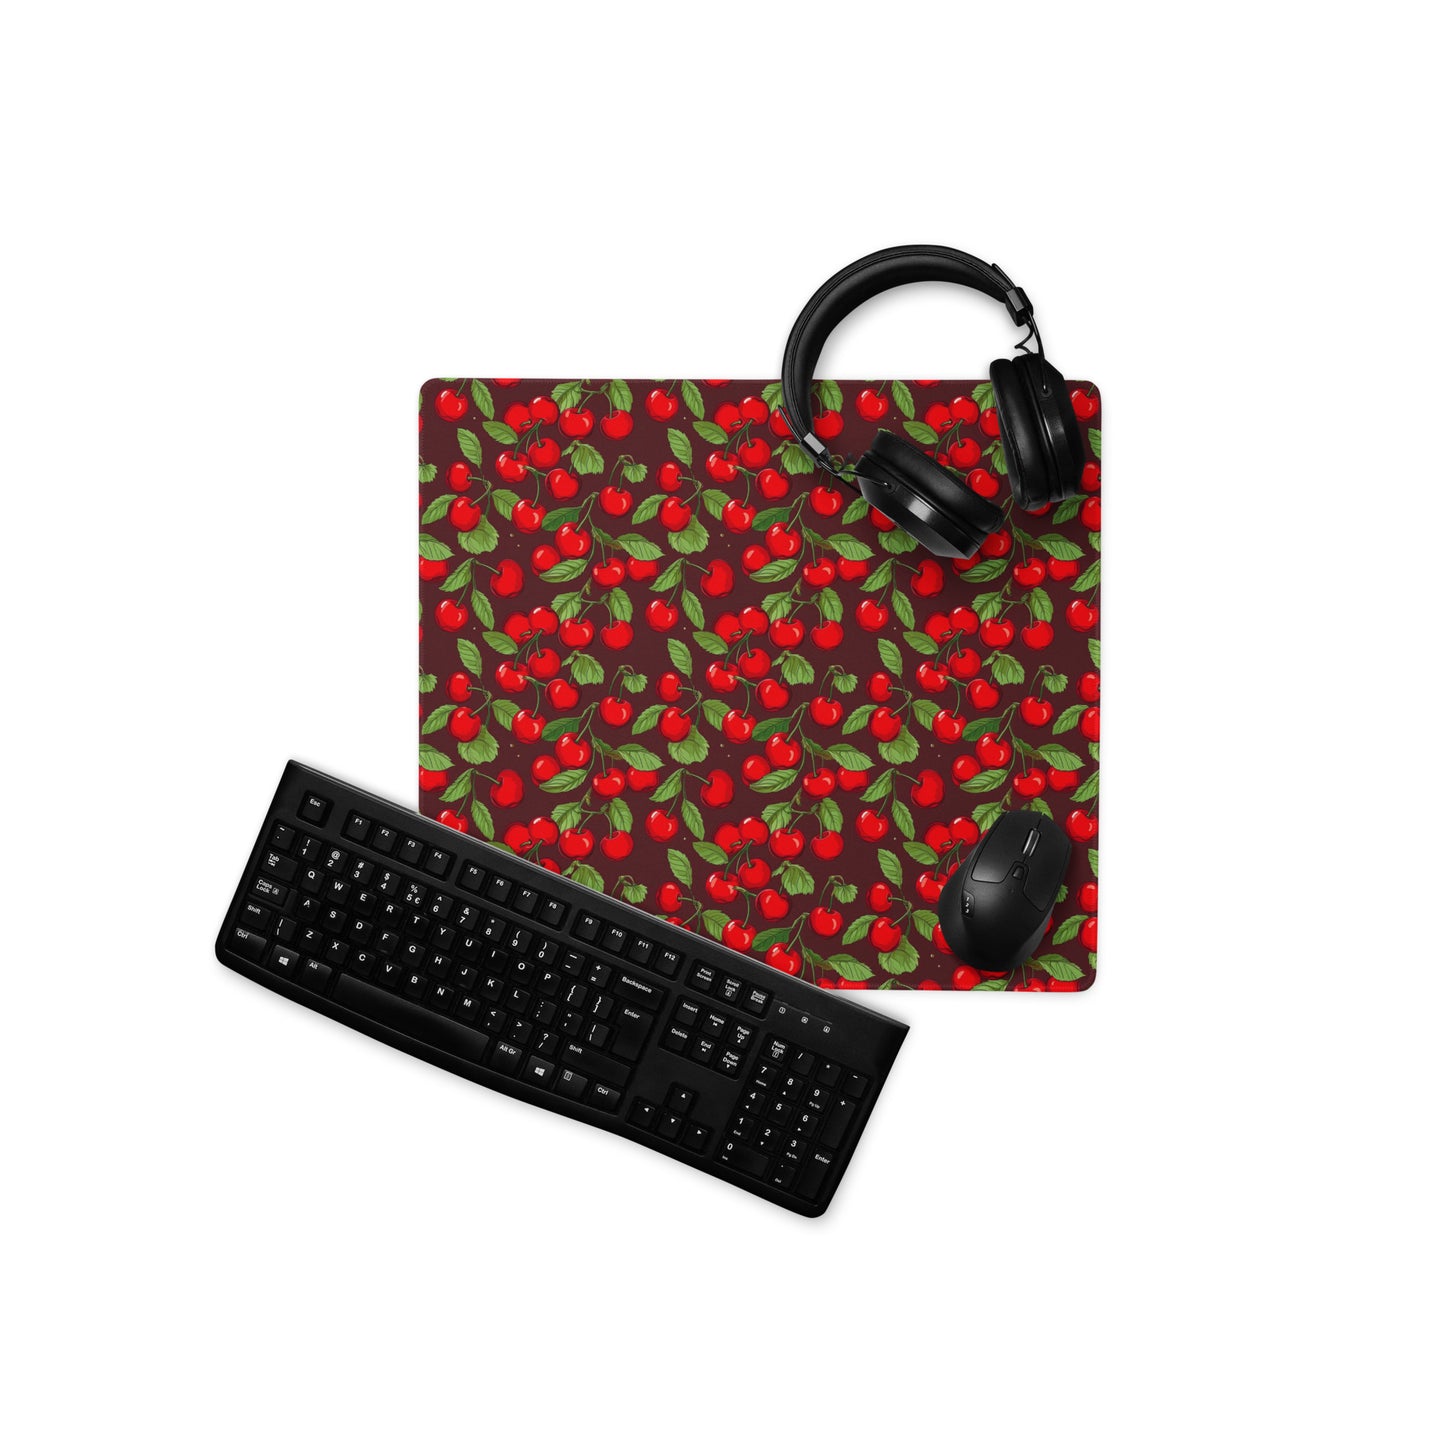 A 18" x 16" desk pad with cherries all over it displayed with a keyboard, headphones and a mouse. Red in color.